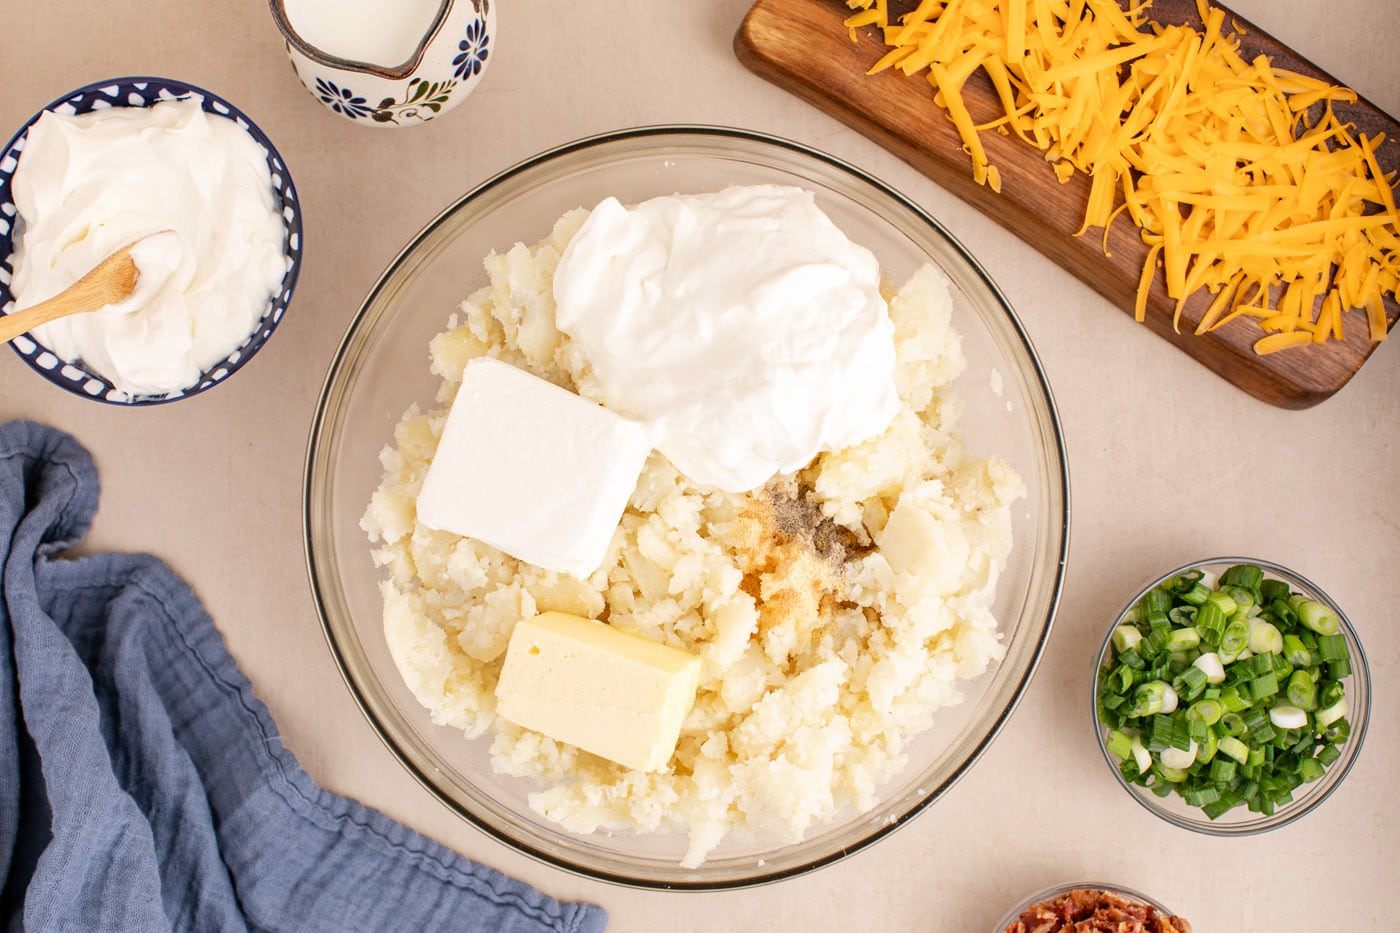 sour cream, cream cheese, milk, butter, and seasonings added to potatoes in a bowl